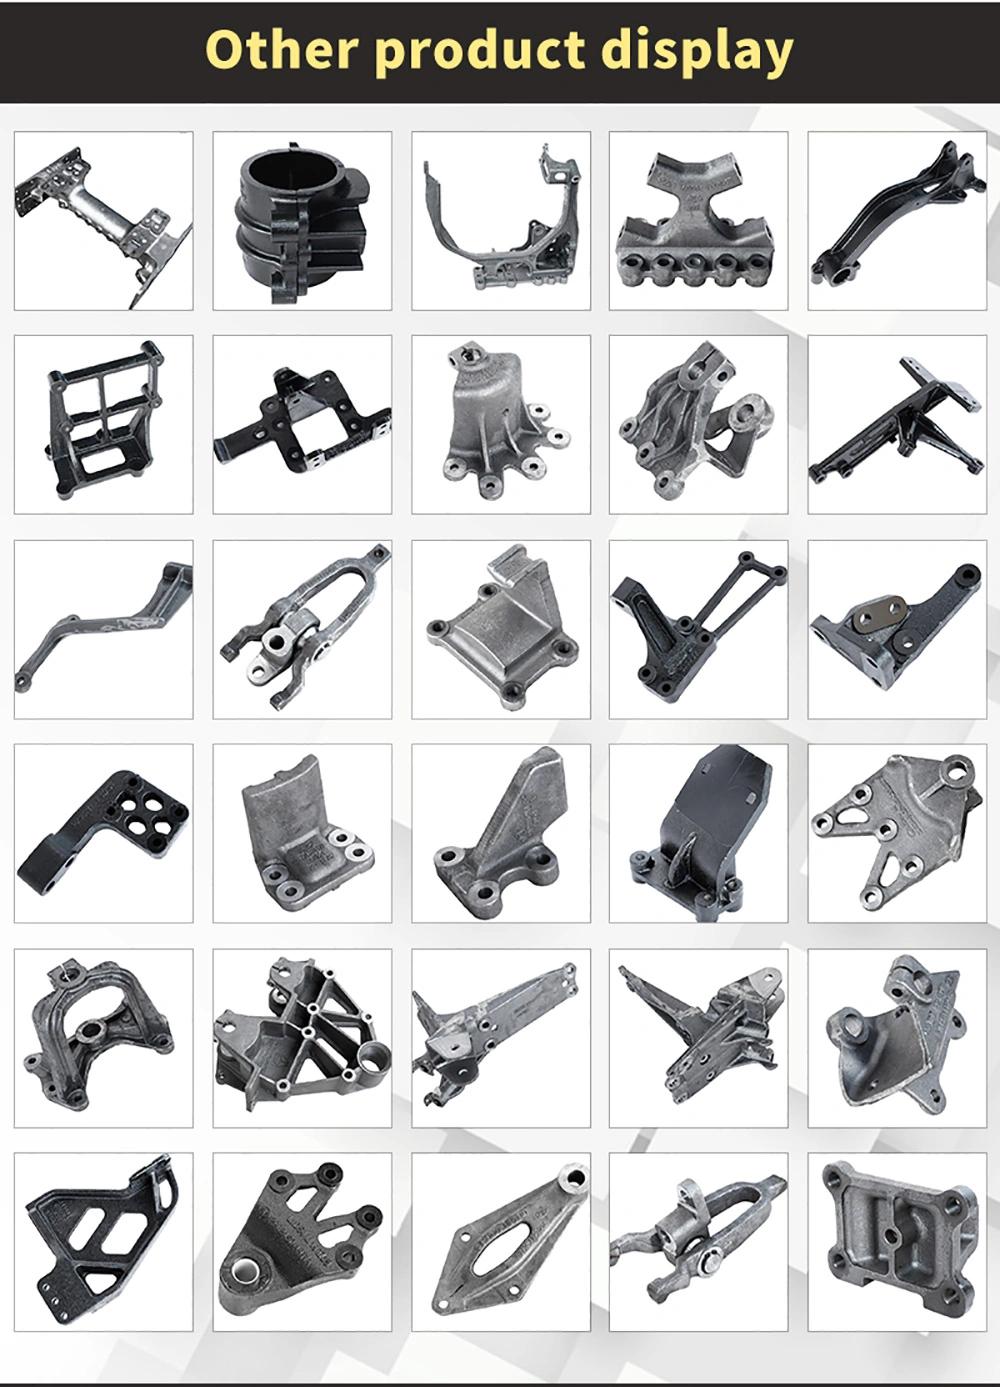 OEM Customized Ductile Iron Truck Parts Suitable for Trucks of Different Brands